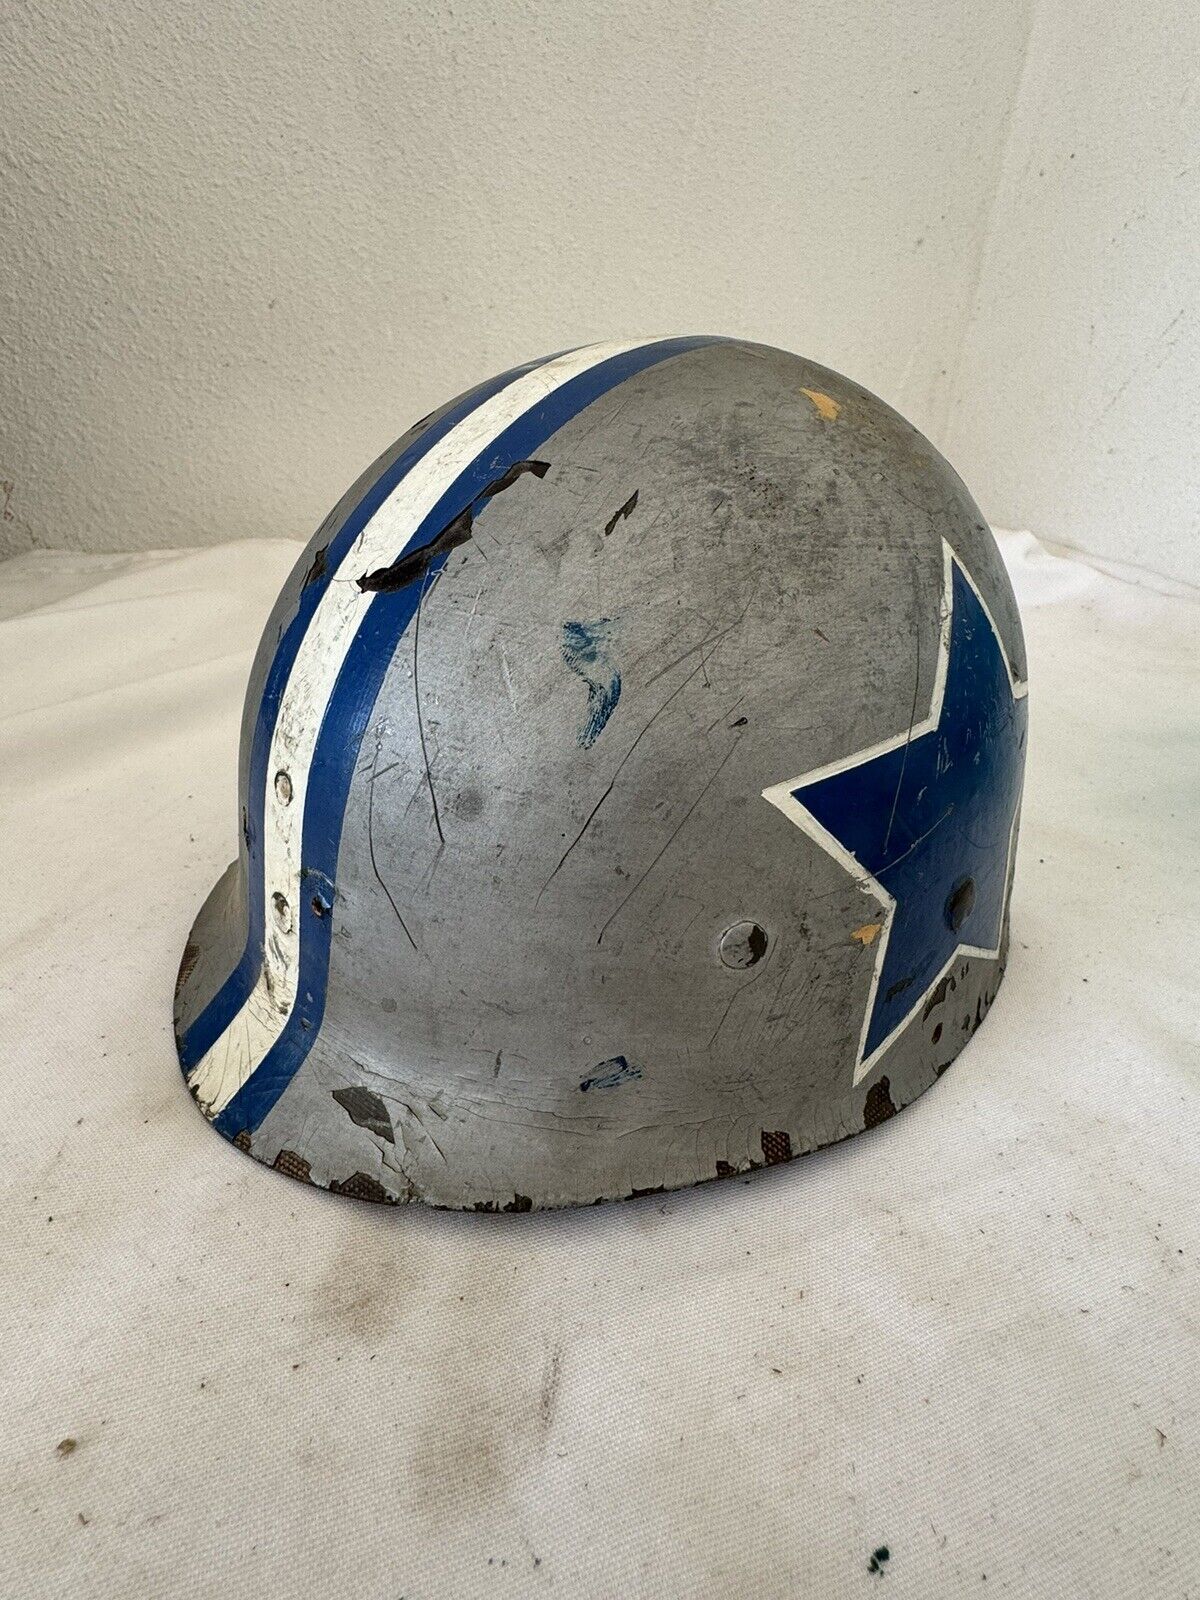 Awesome US Helmet  “Cowboys” Painted Liner